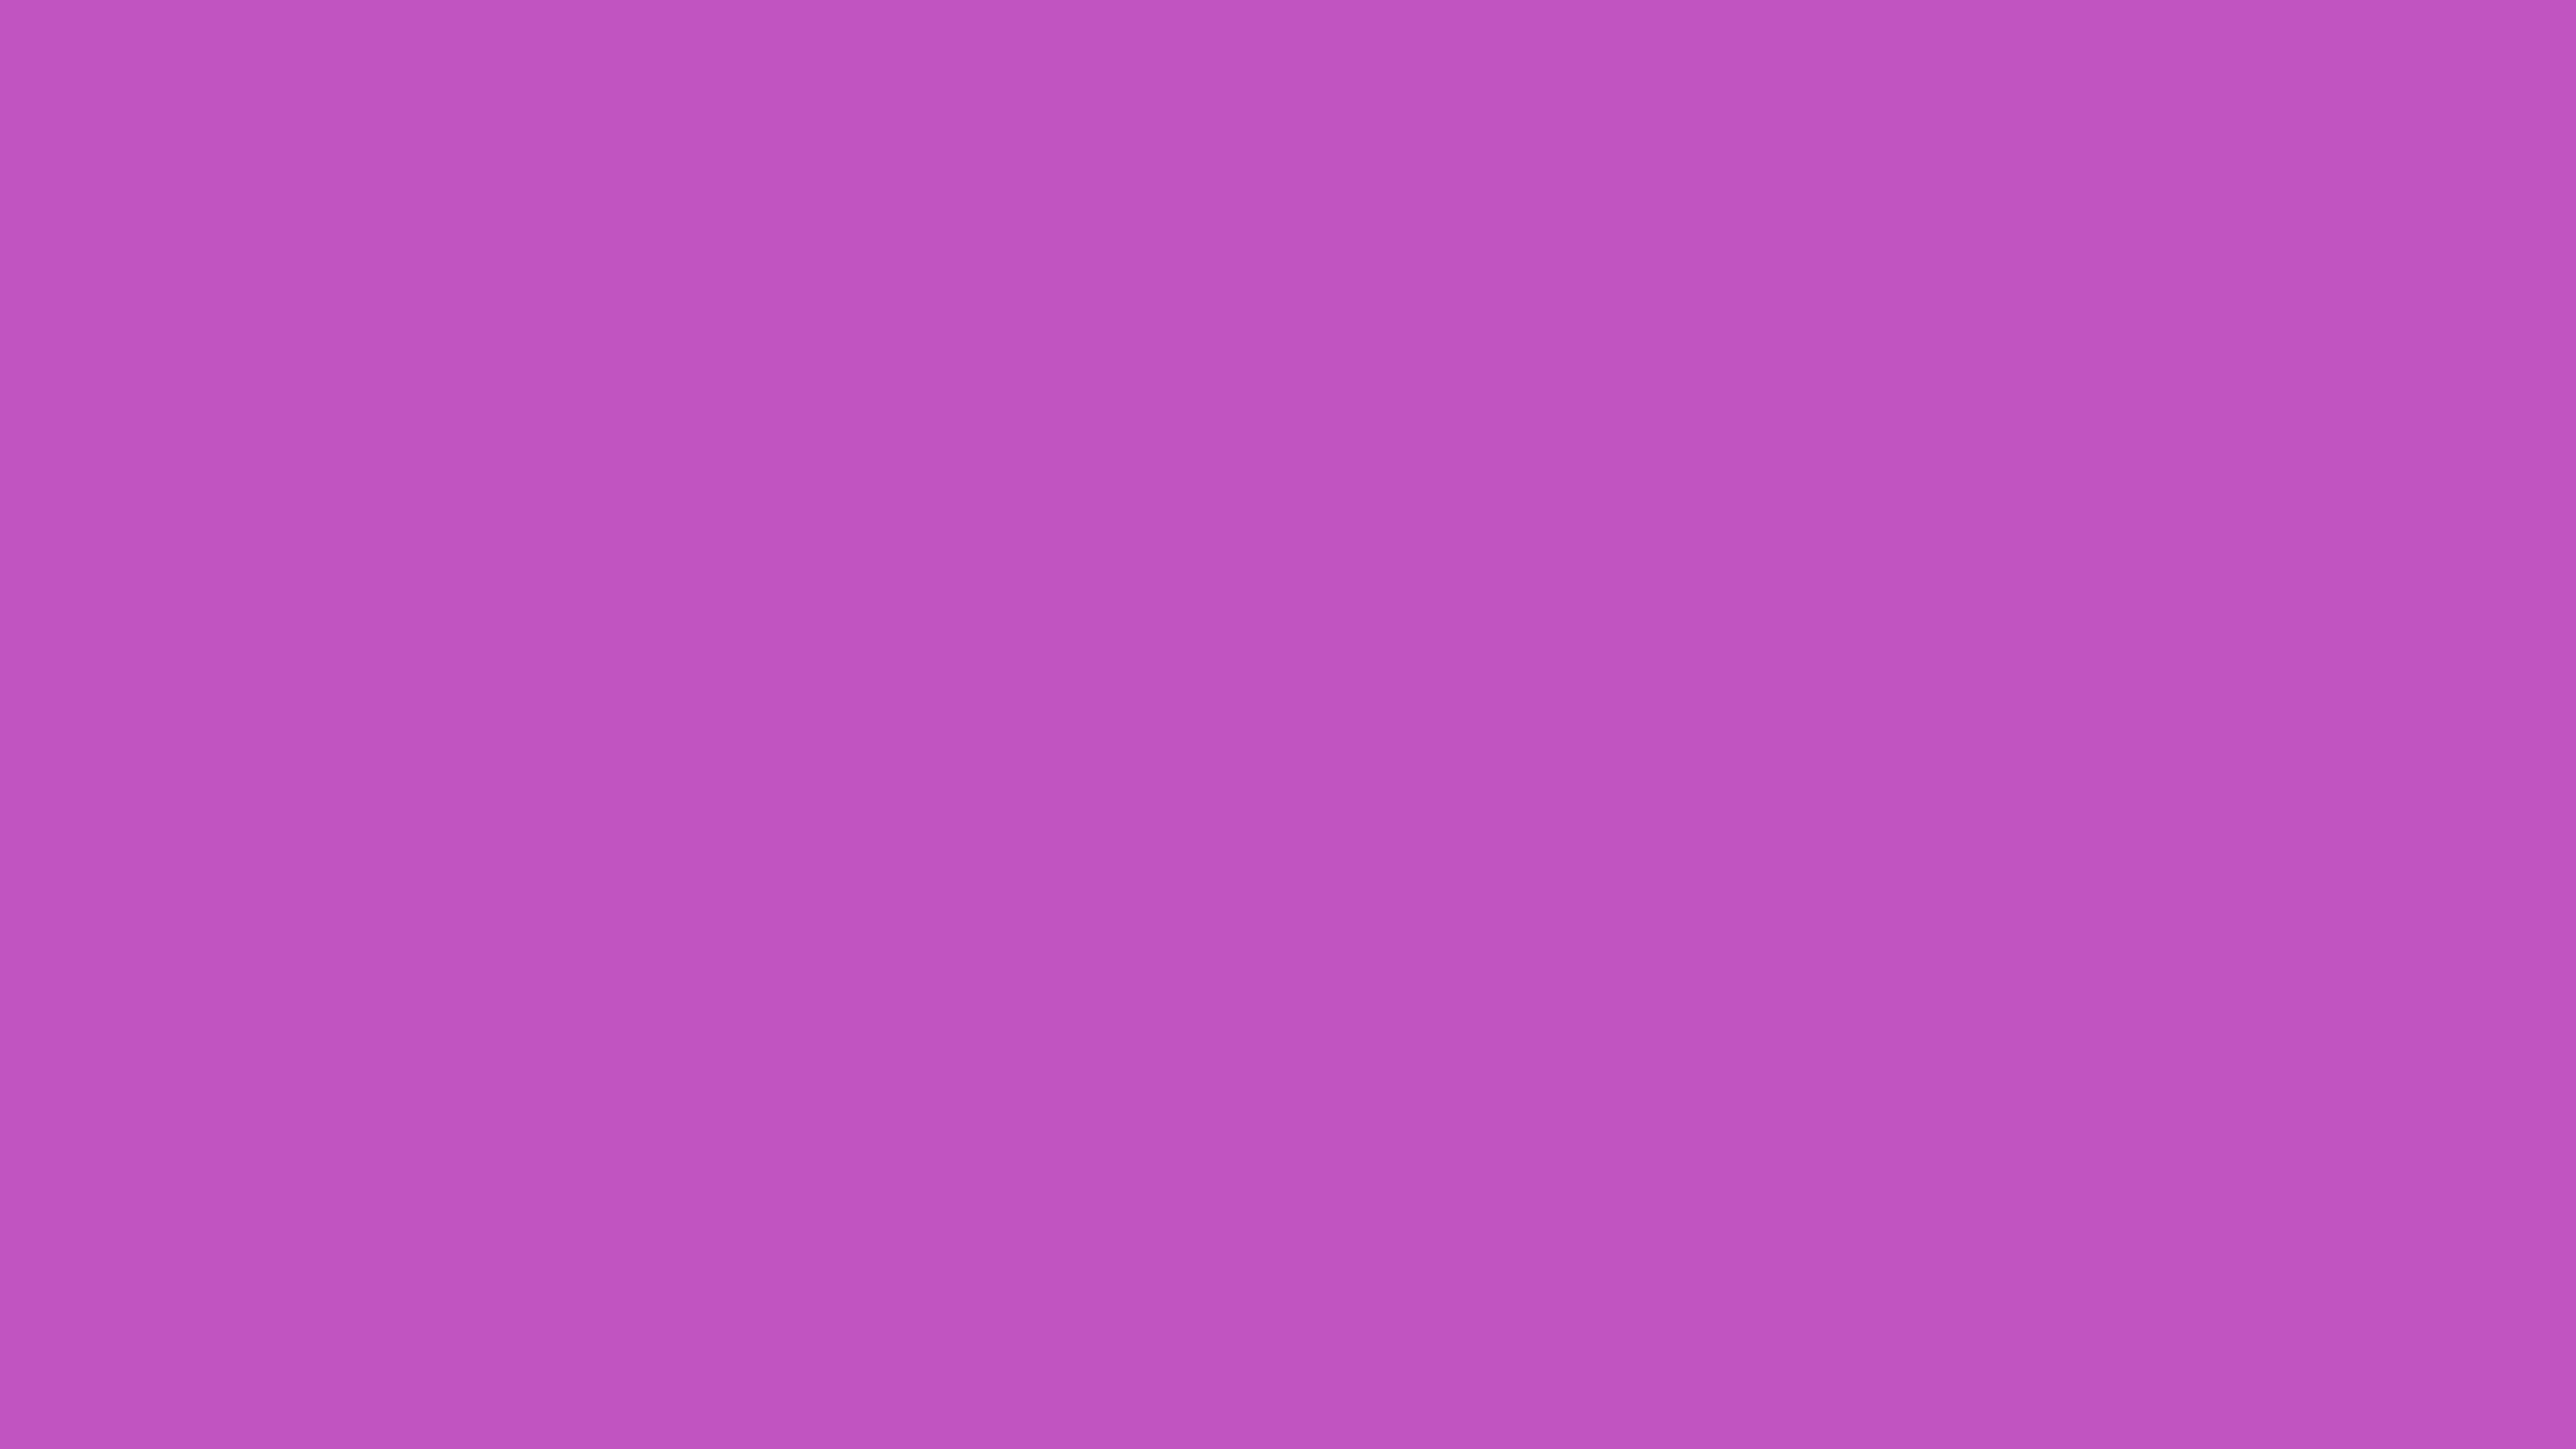 7680x4320 Deep Fuchsia Solid Color Background